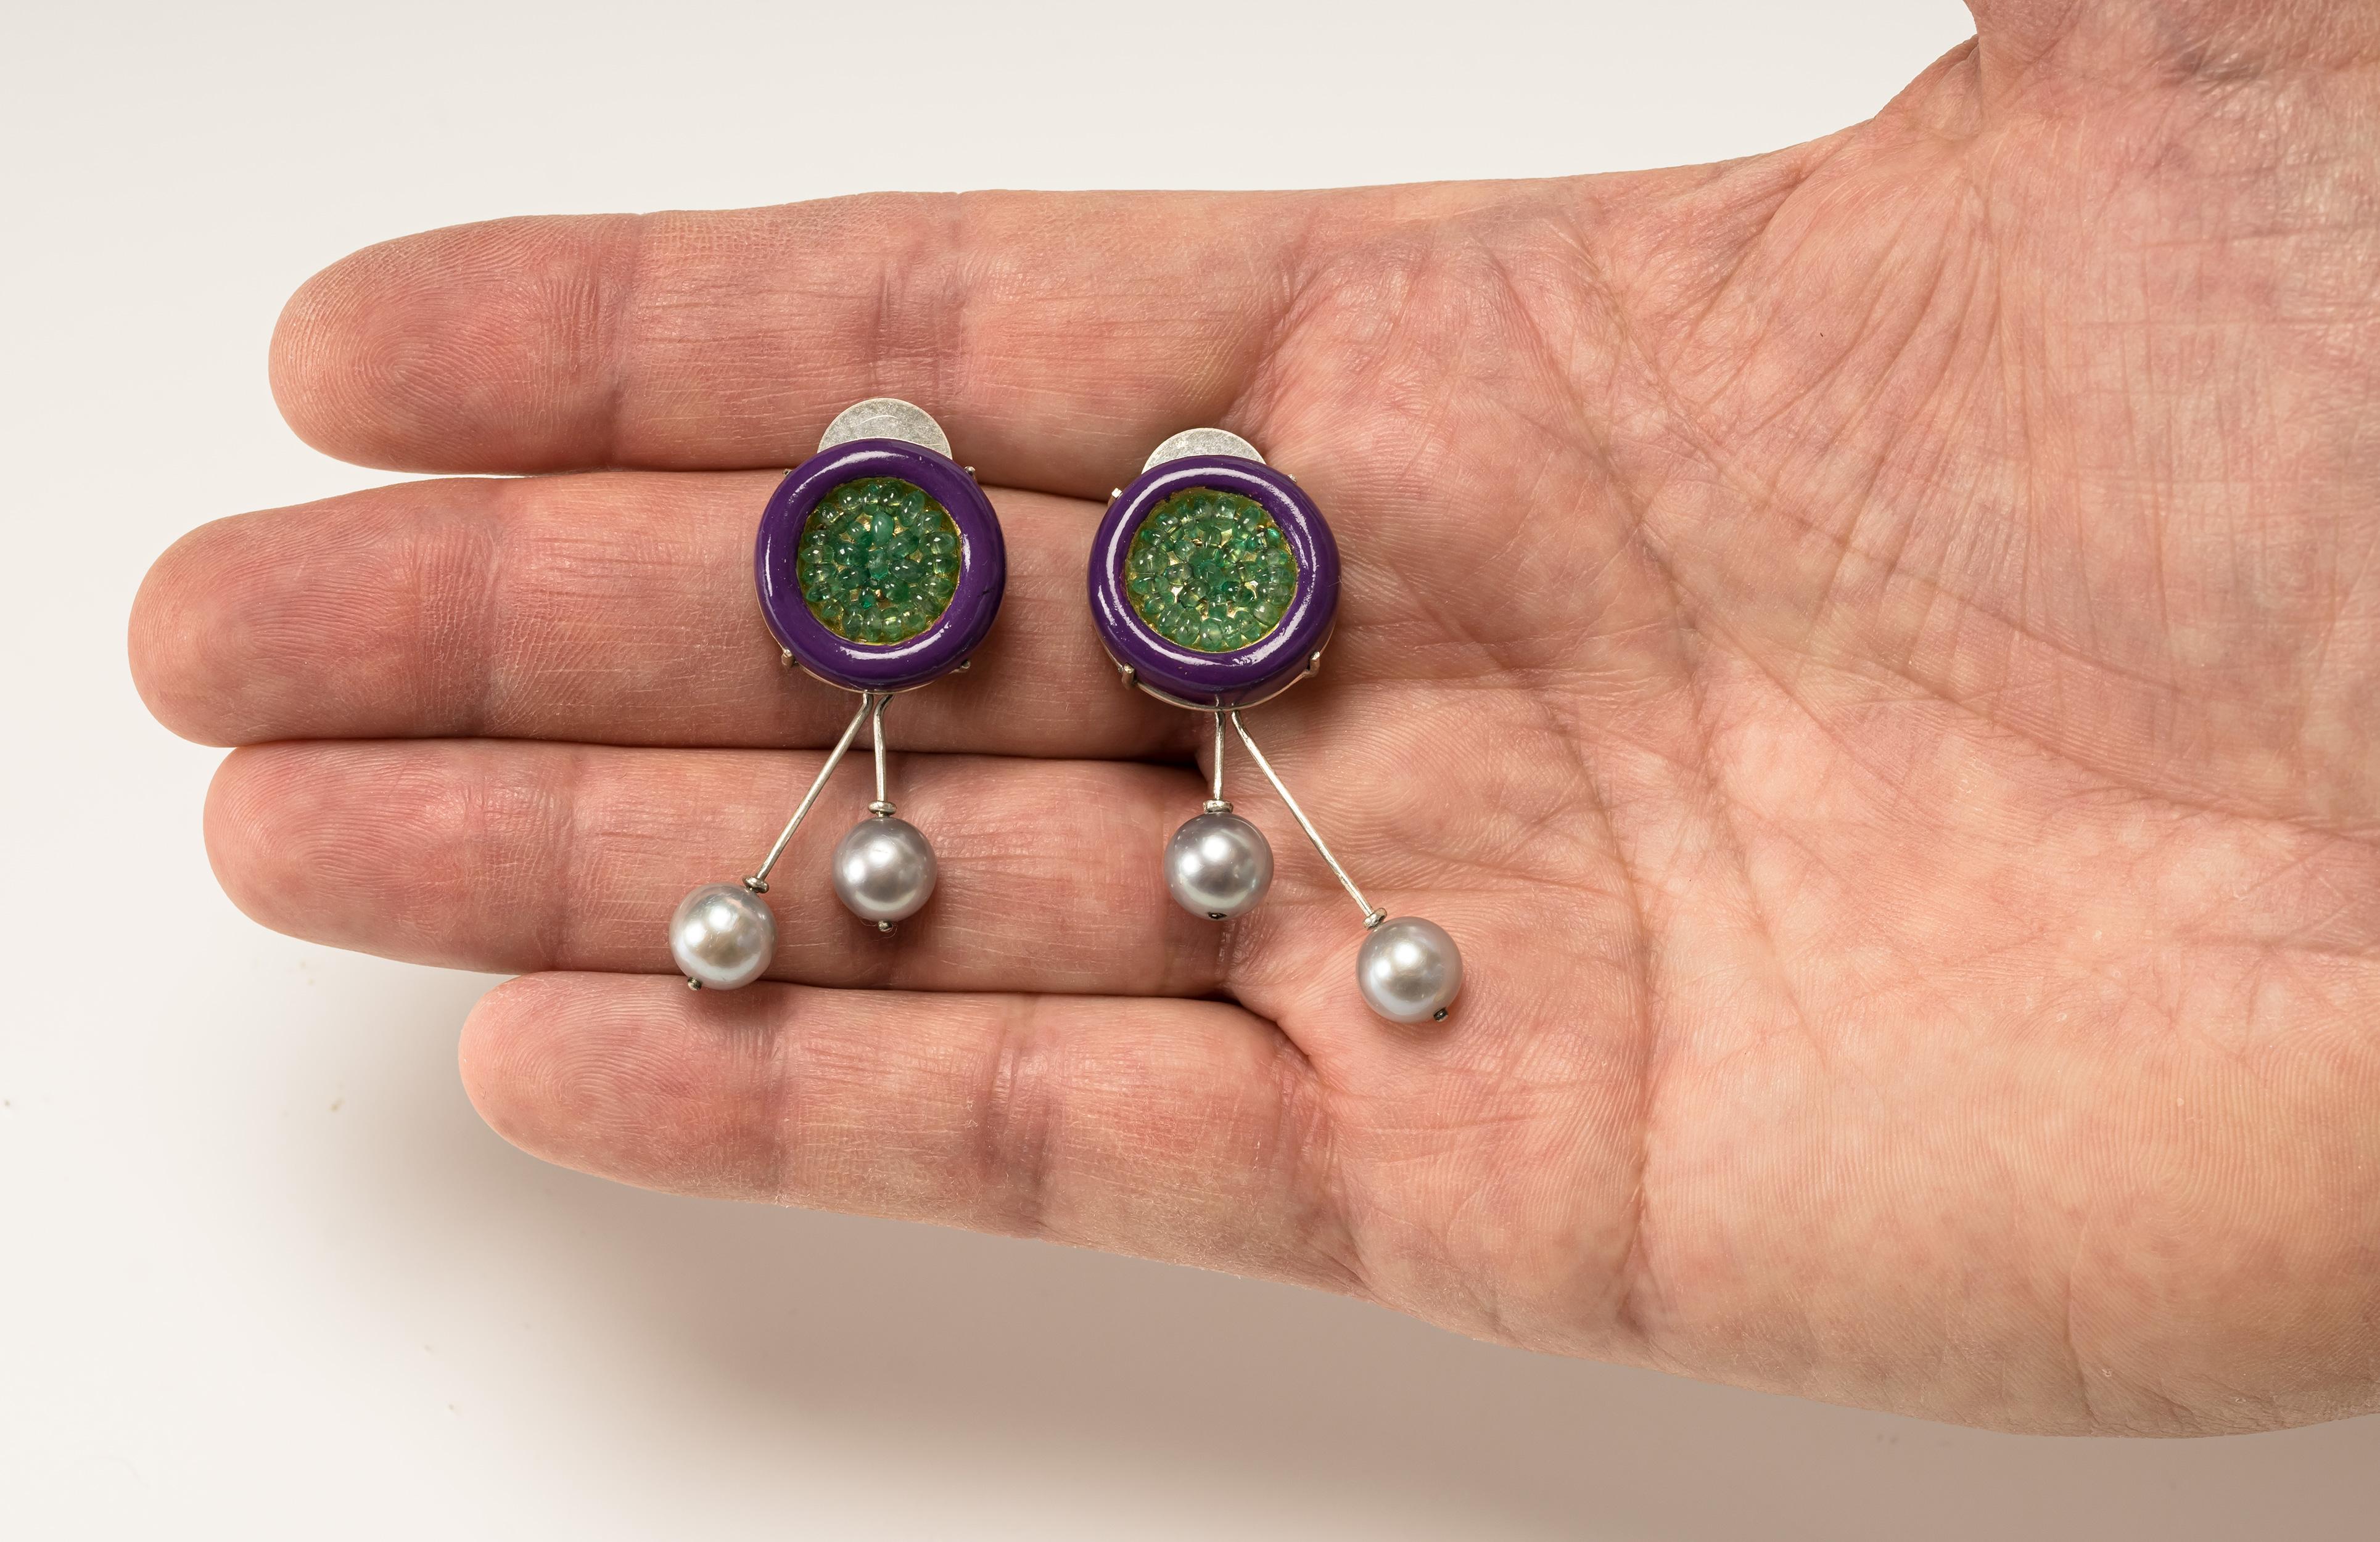 Earrings “Ribes 2”, 2022, are a limited edition contemporary author jewelry by italian artist Gian Luca Bartellone.
Materials: papier-mâché, gold 18kt, silver, emeralds, pearls, gold leaf 22kt.

The main body is made of papier-mâché and is